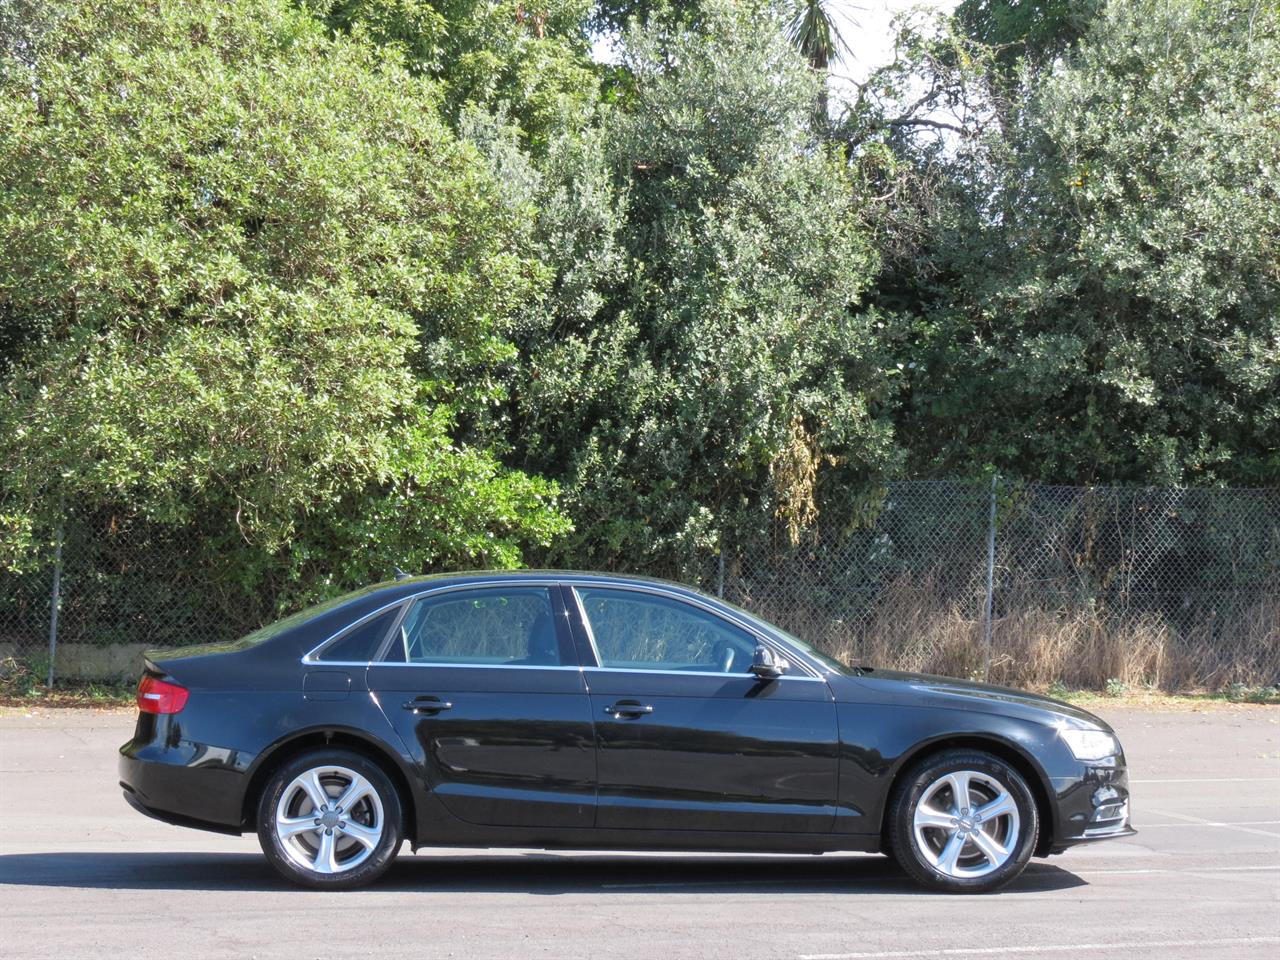 2015 Audi A4 only $57 weekly